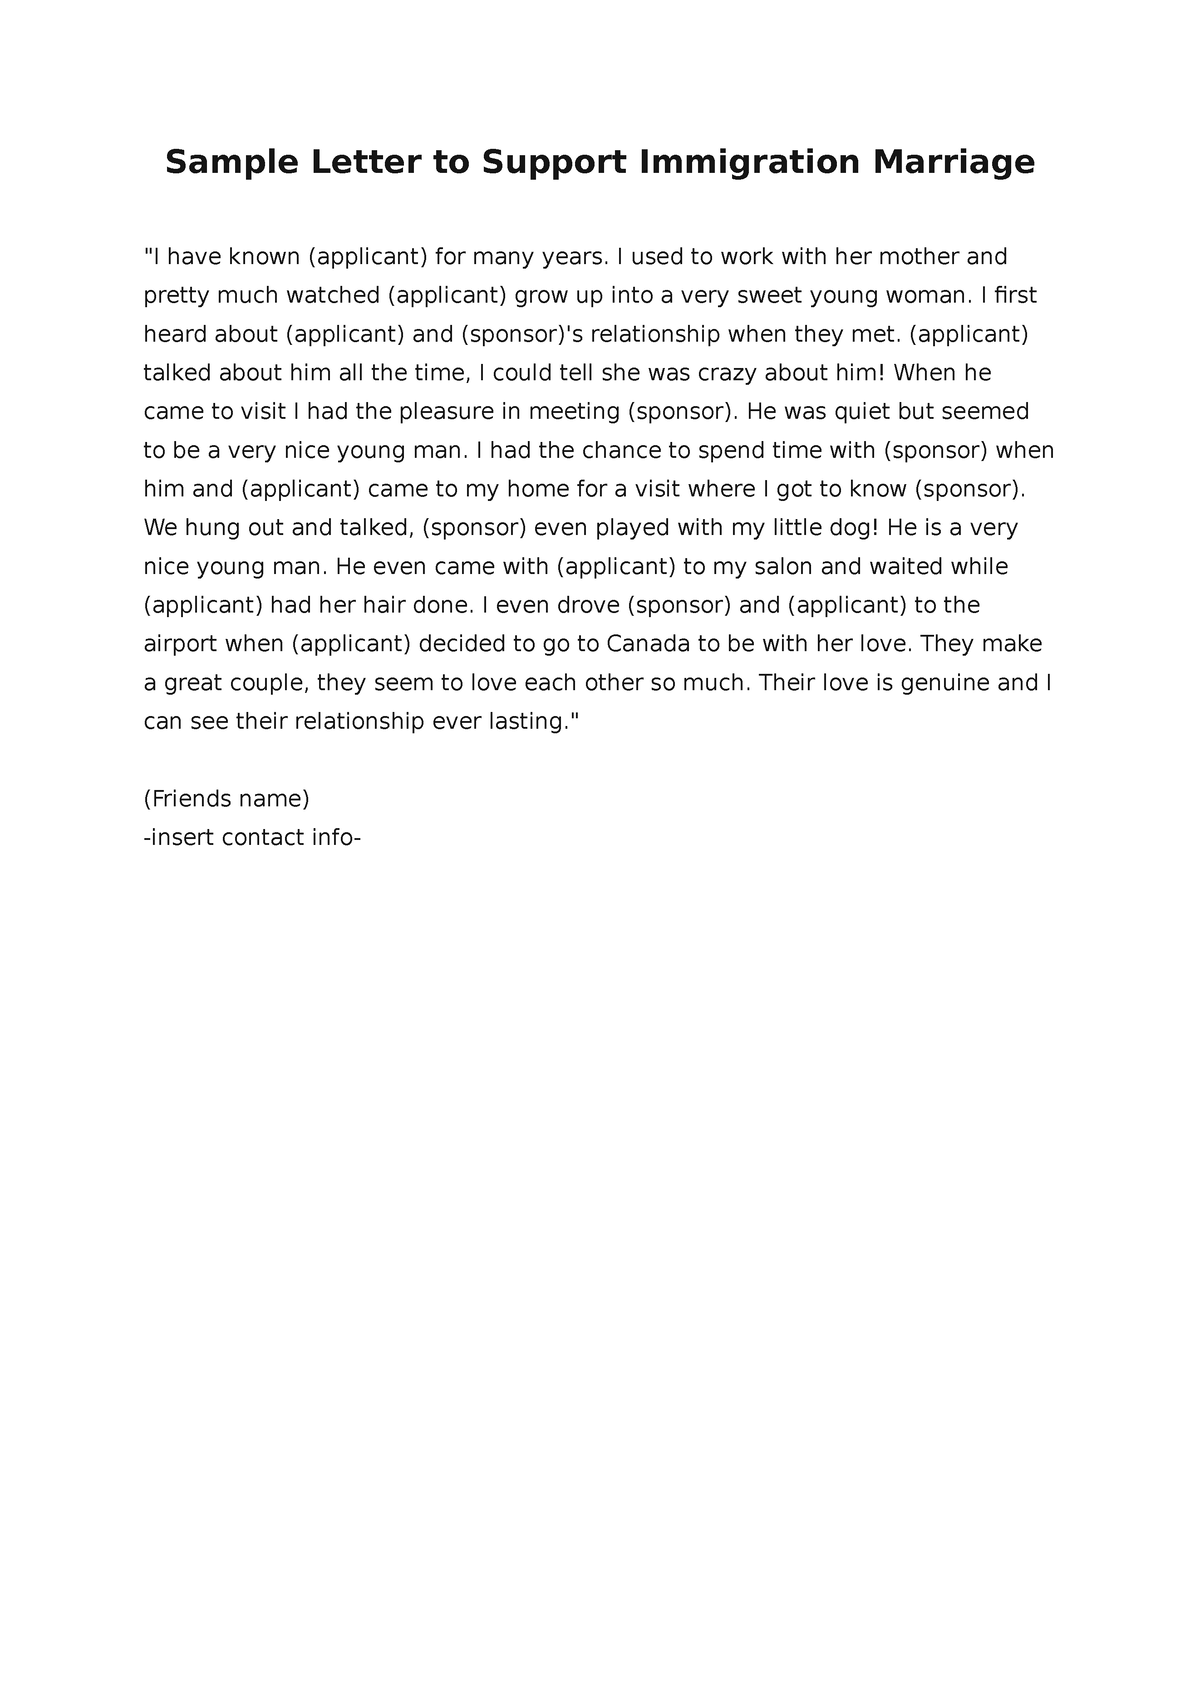 Sample Letter Of Immigration Marriage Support From Friend Sample